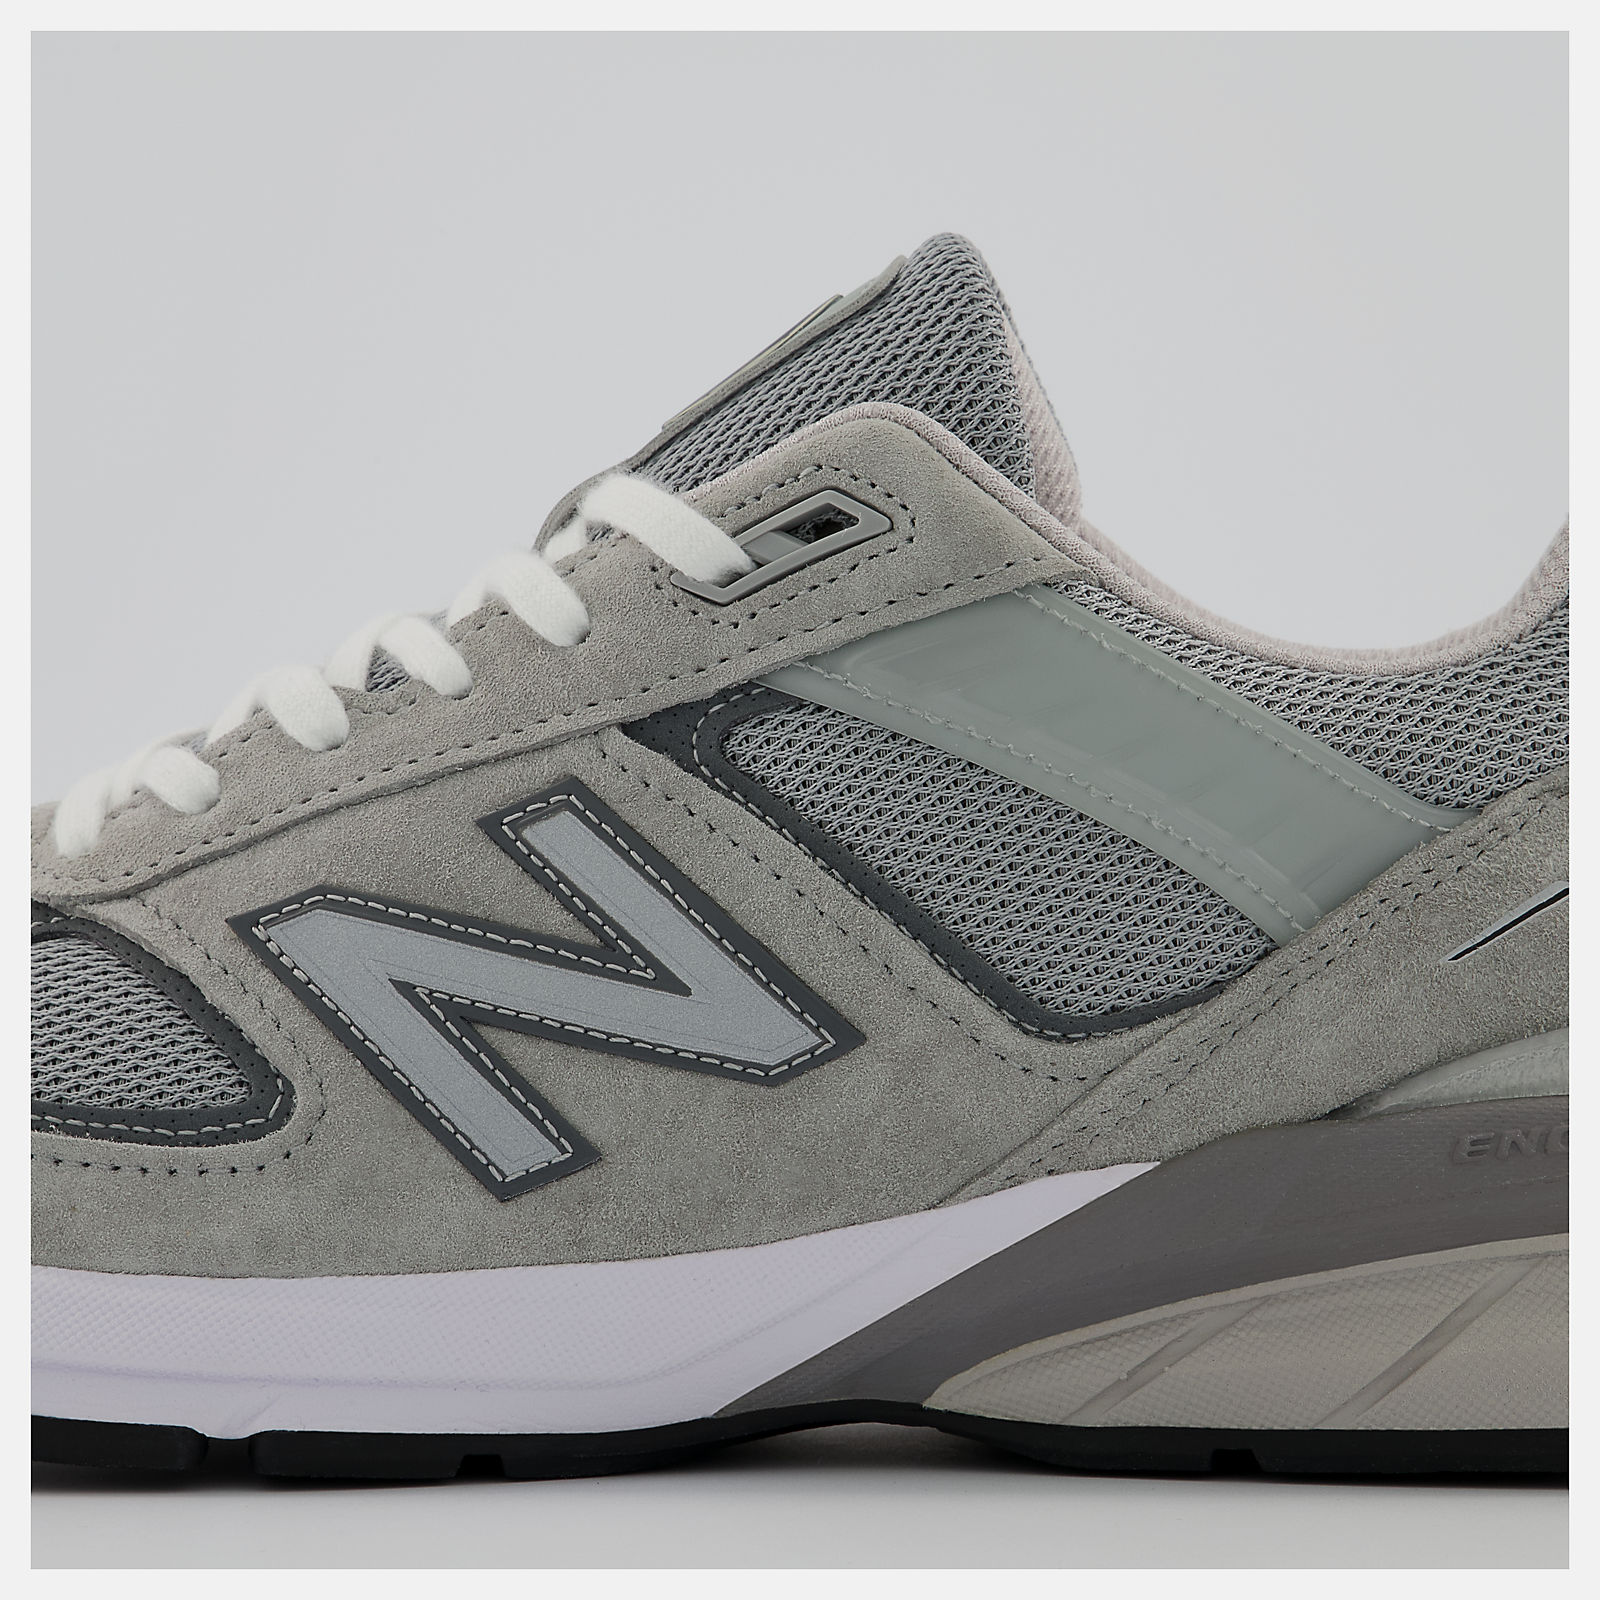 Made in US 990v5 - New Balance